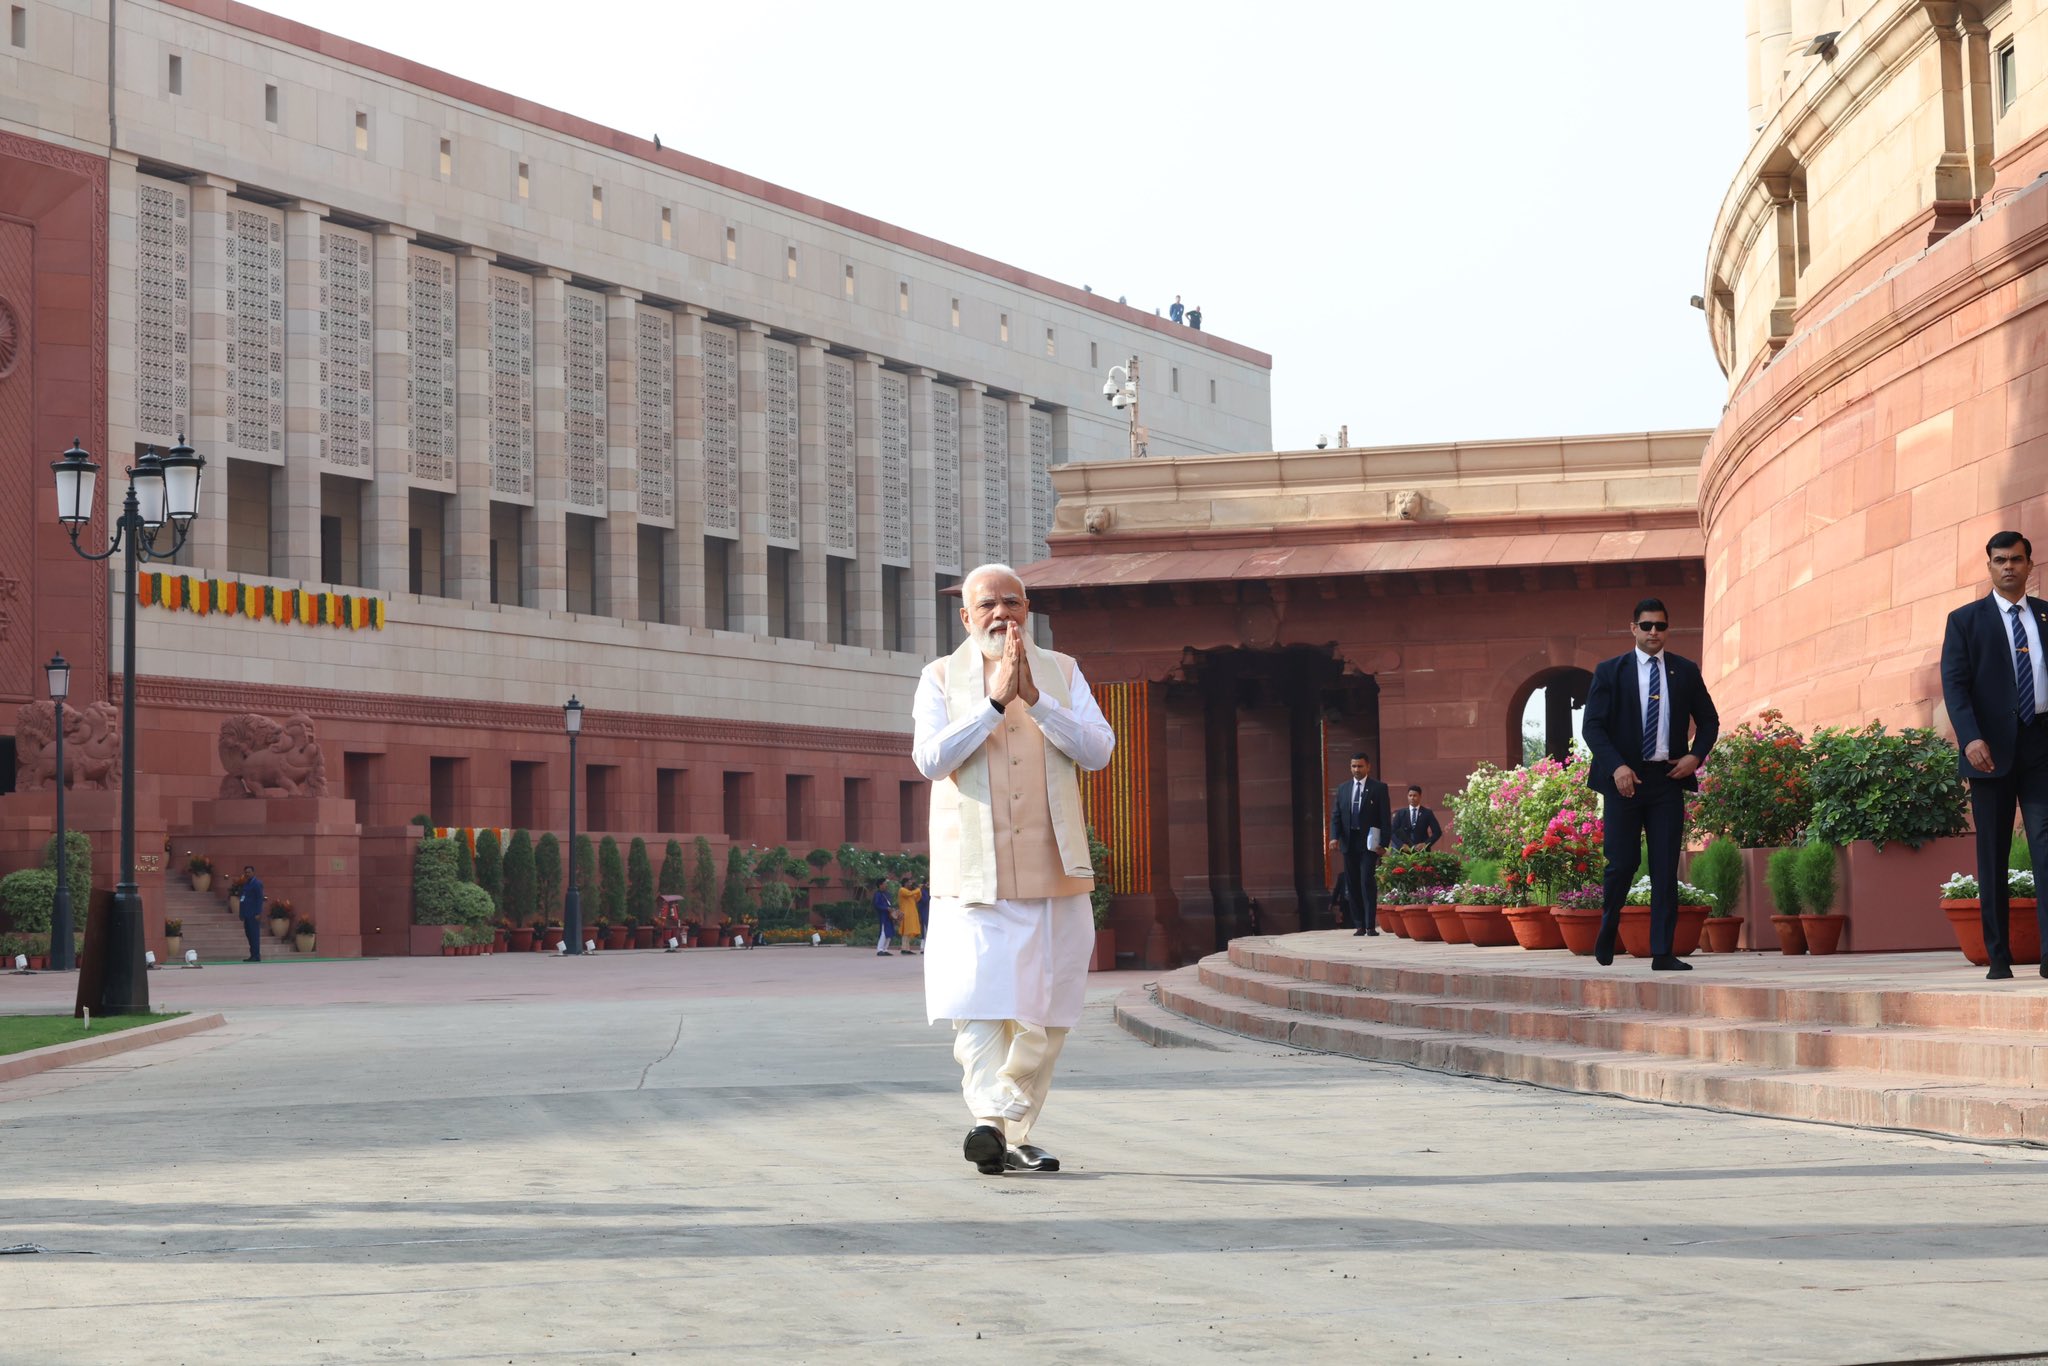 Inauguration of the New Parliament House